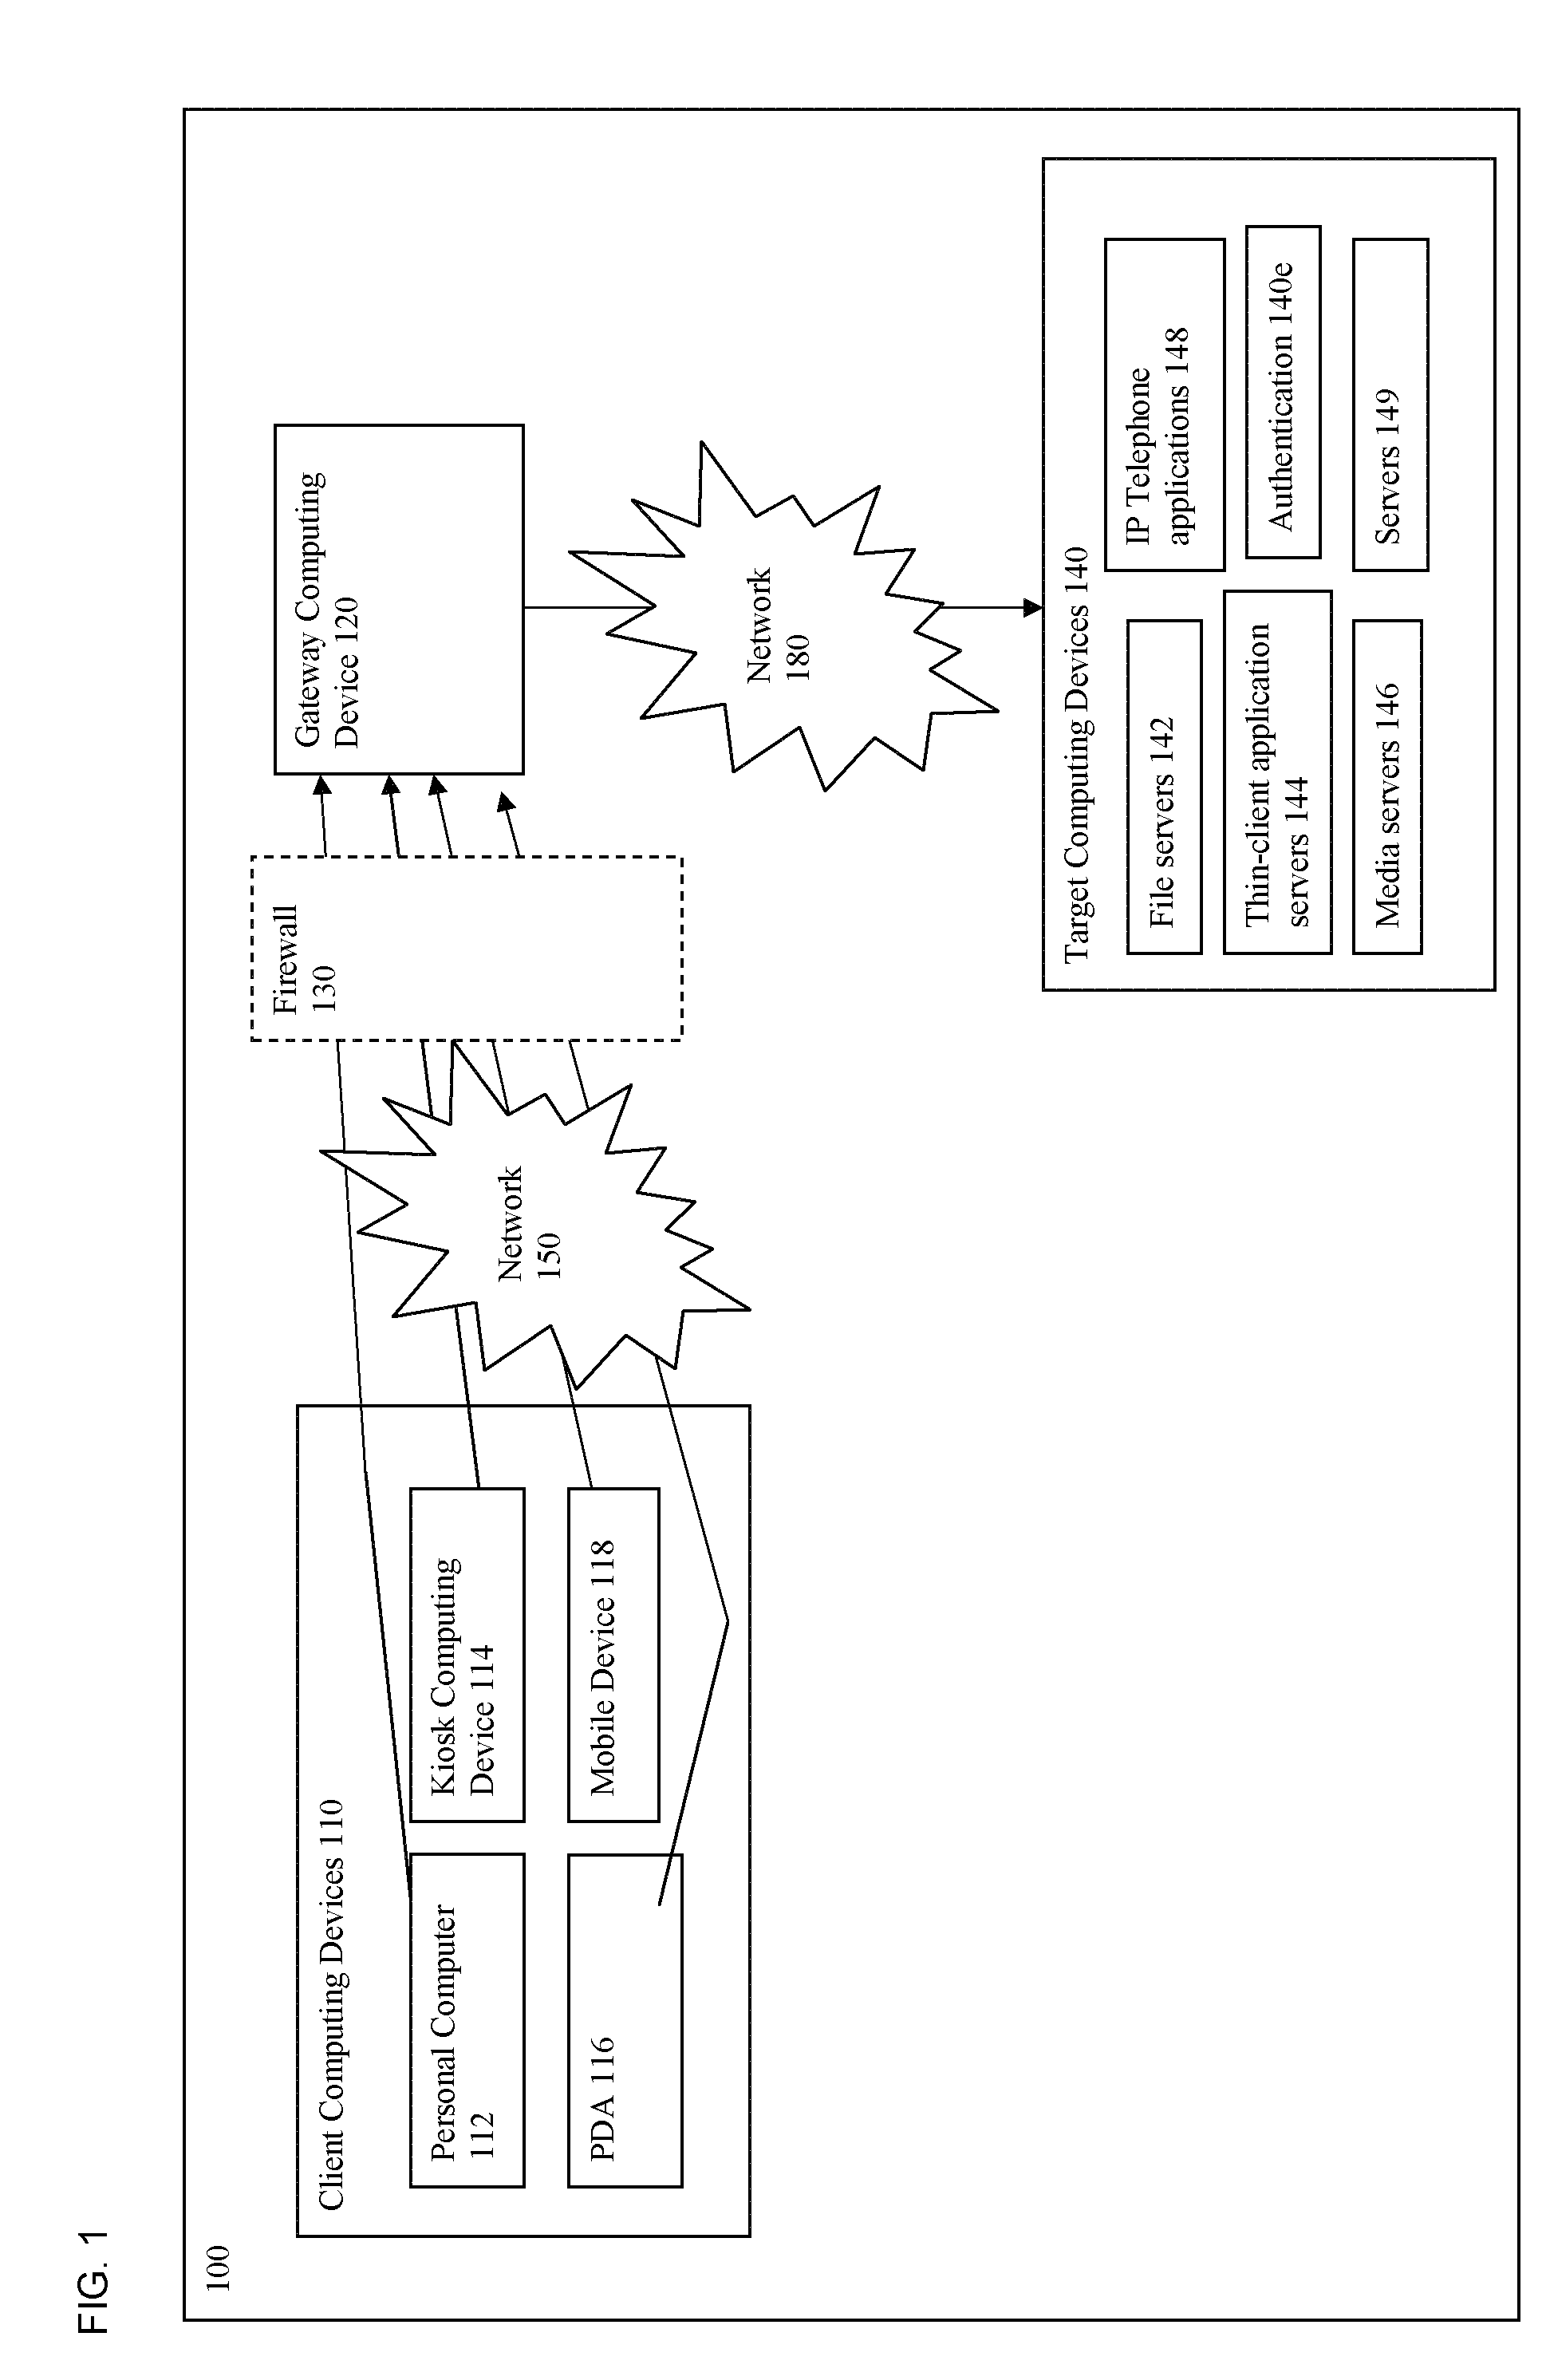 A method and systems for routing packets from a gateway to an endpoint